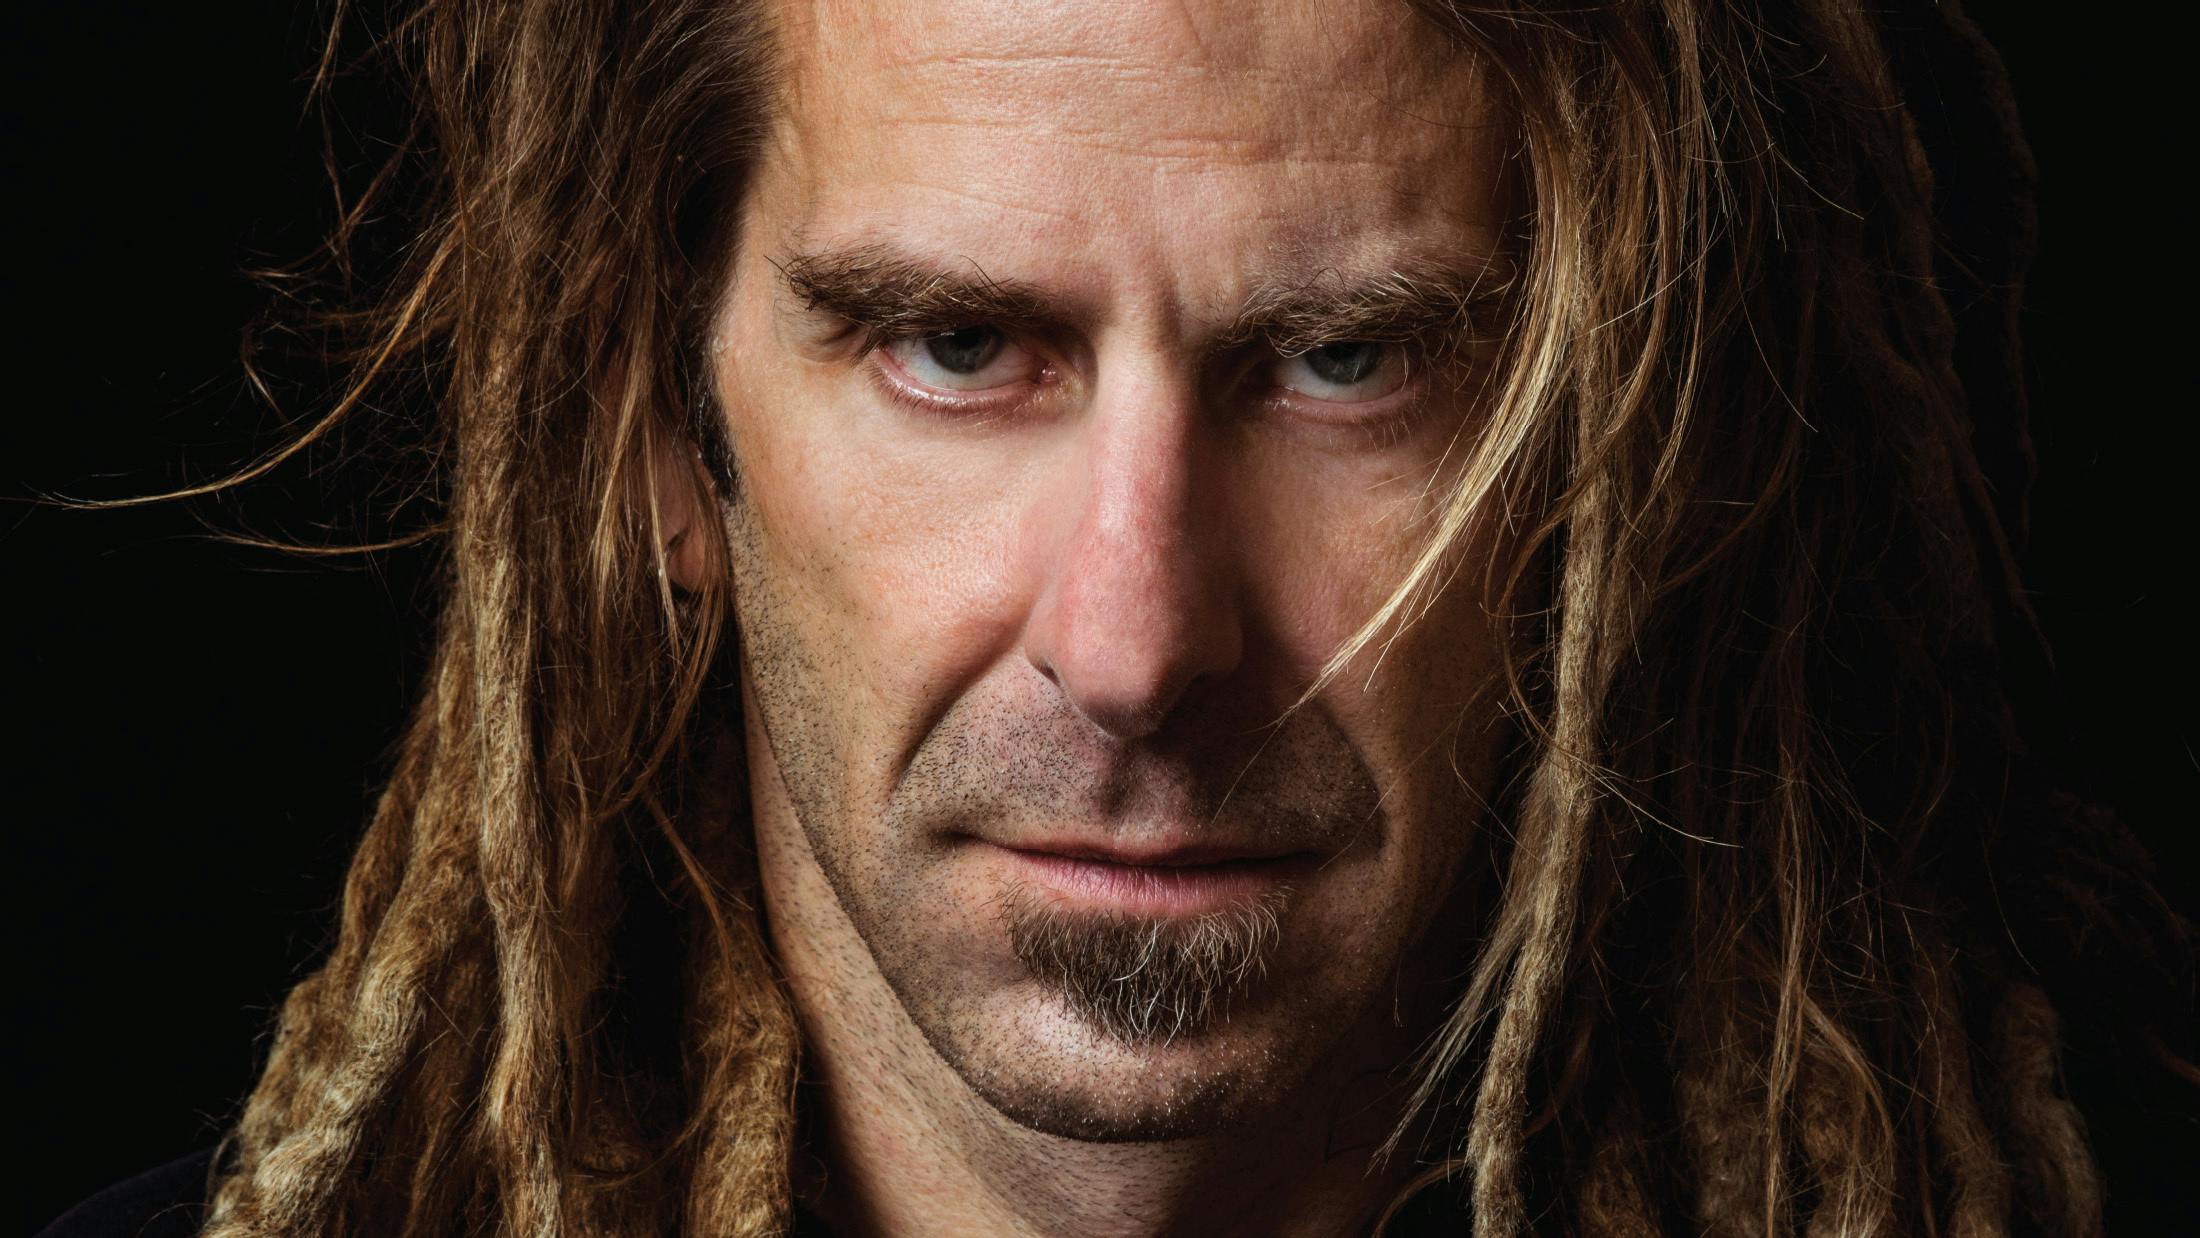 Randy Blythe: "In An Ideal World, I Would Have Made Millions, Retired To A Hilltop Mansion And Be Surrounded By Models By Now"